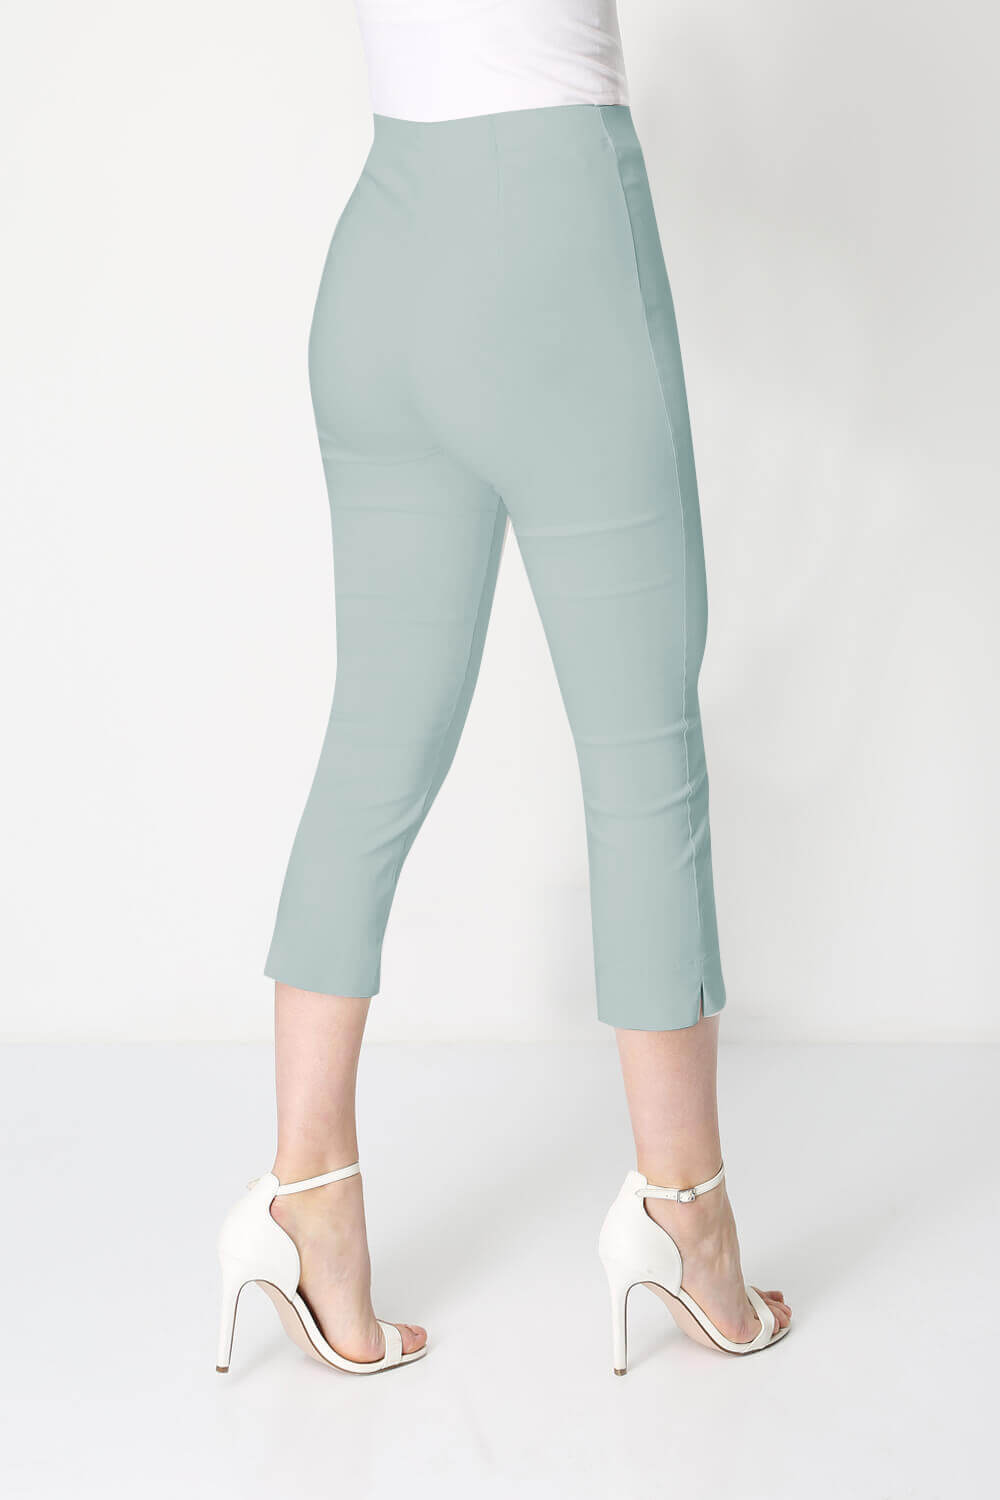 Steel Blue Cropped Stretch Trouser, Image 2 of 7